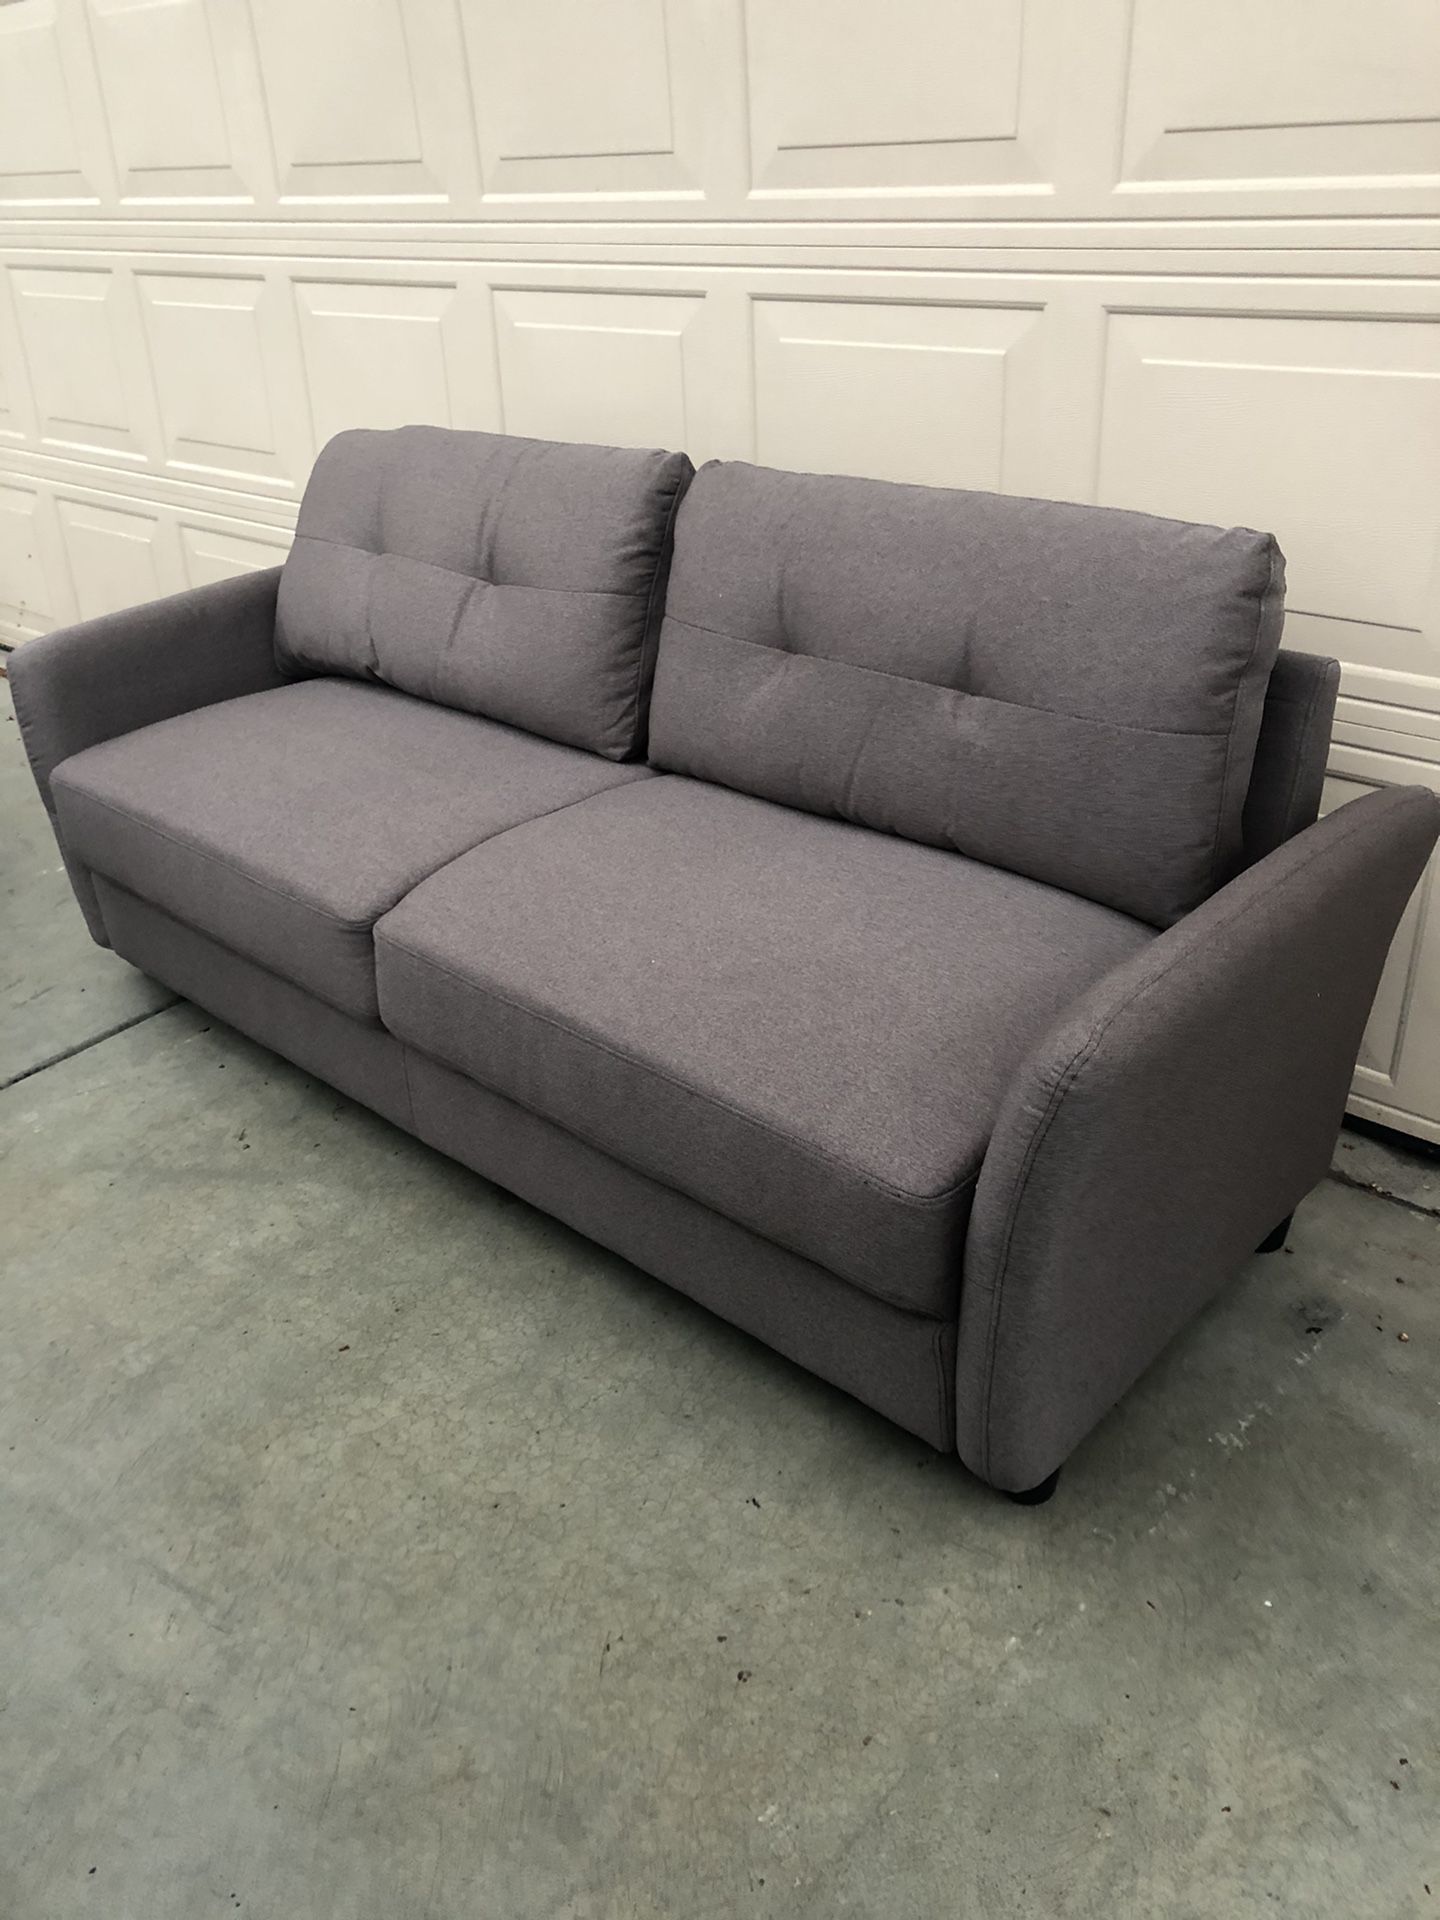 Brand new set of 2 matching contemporary sofas. Retails for over $1000